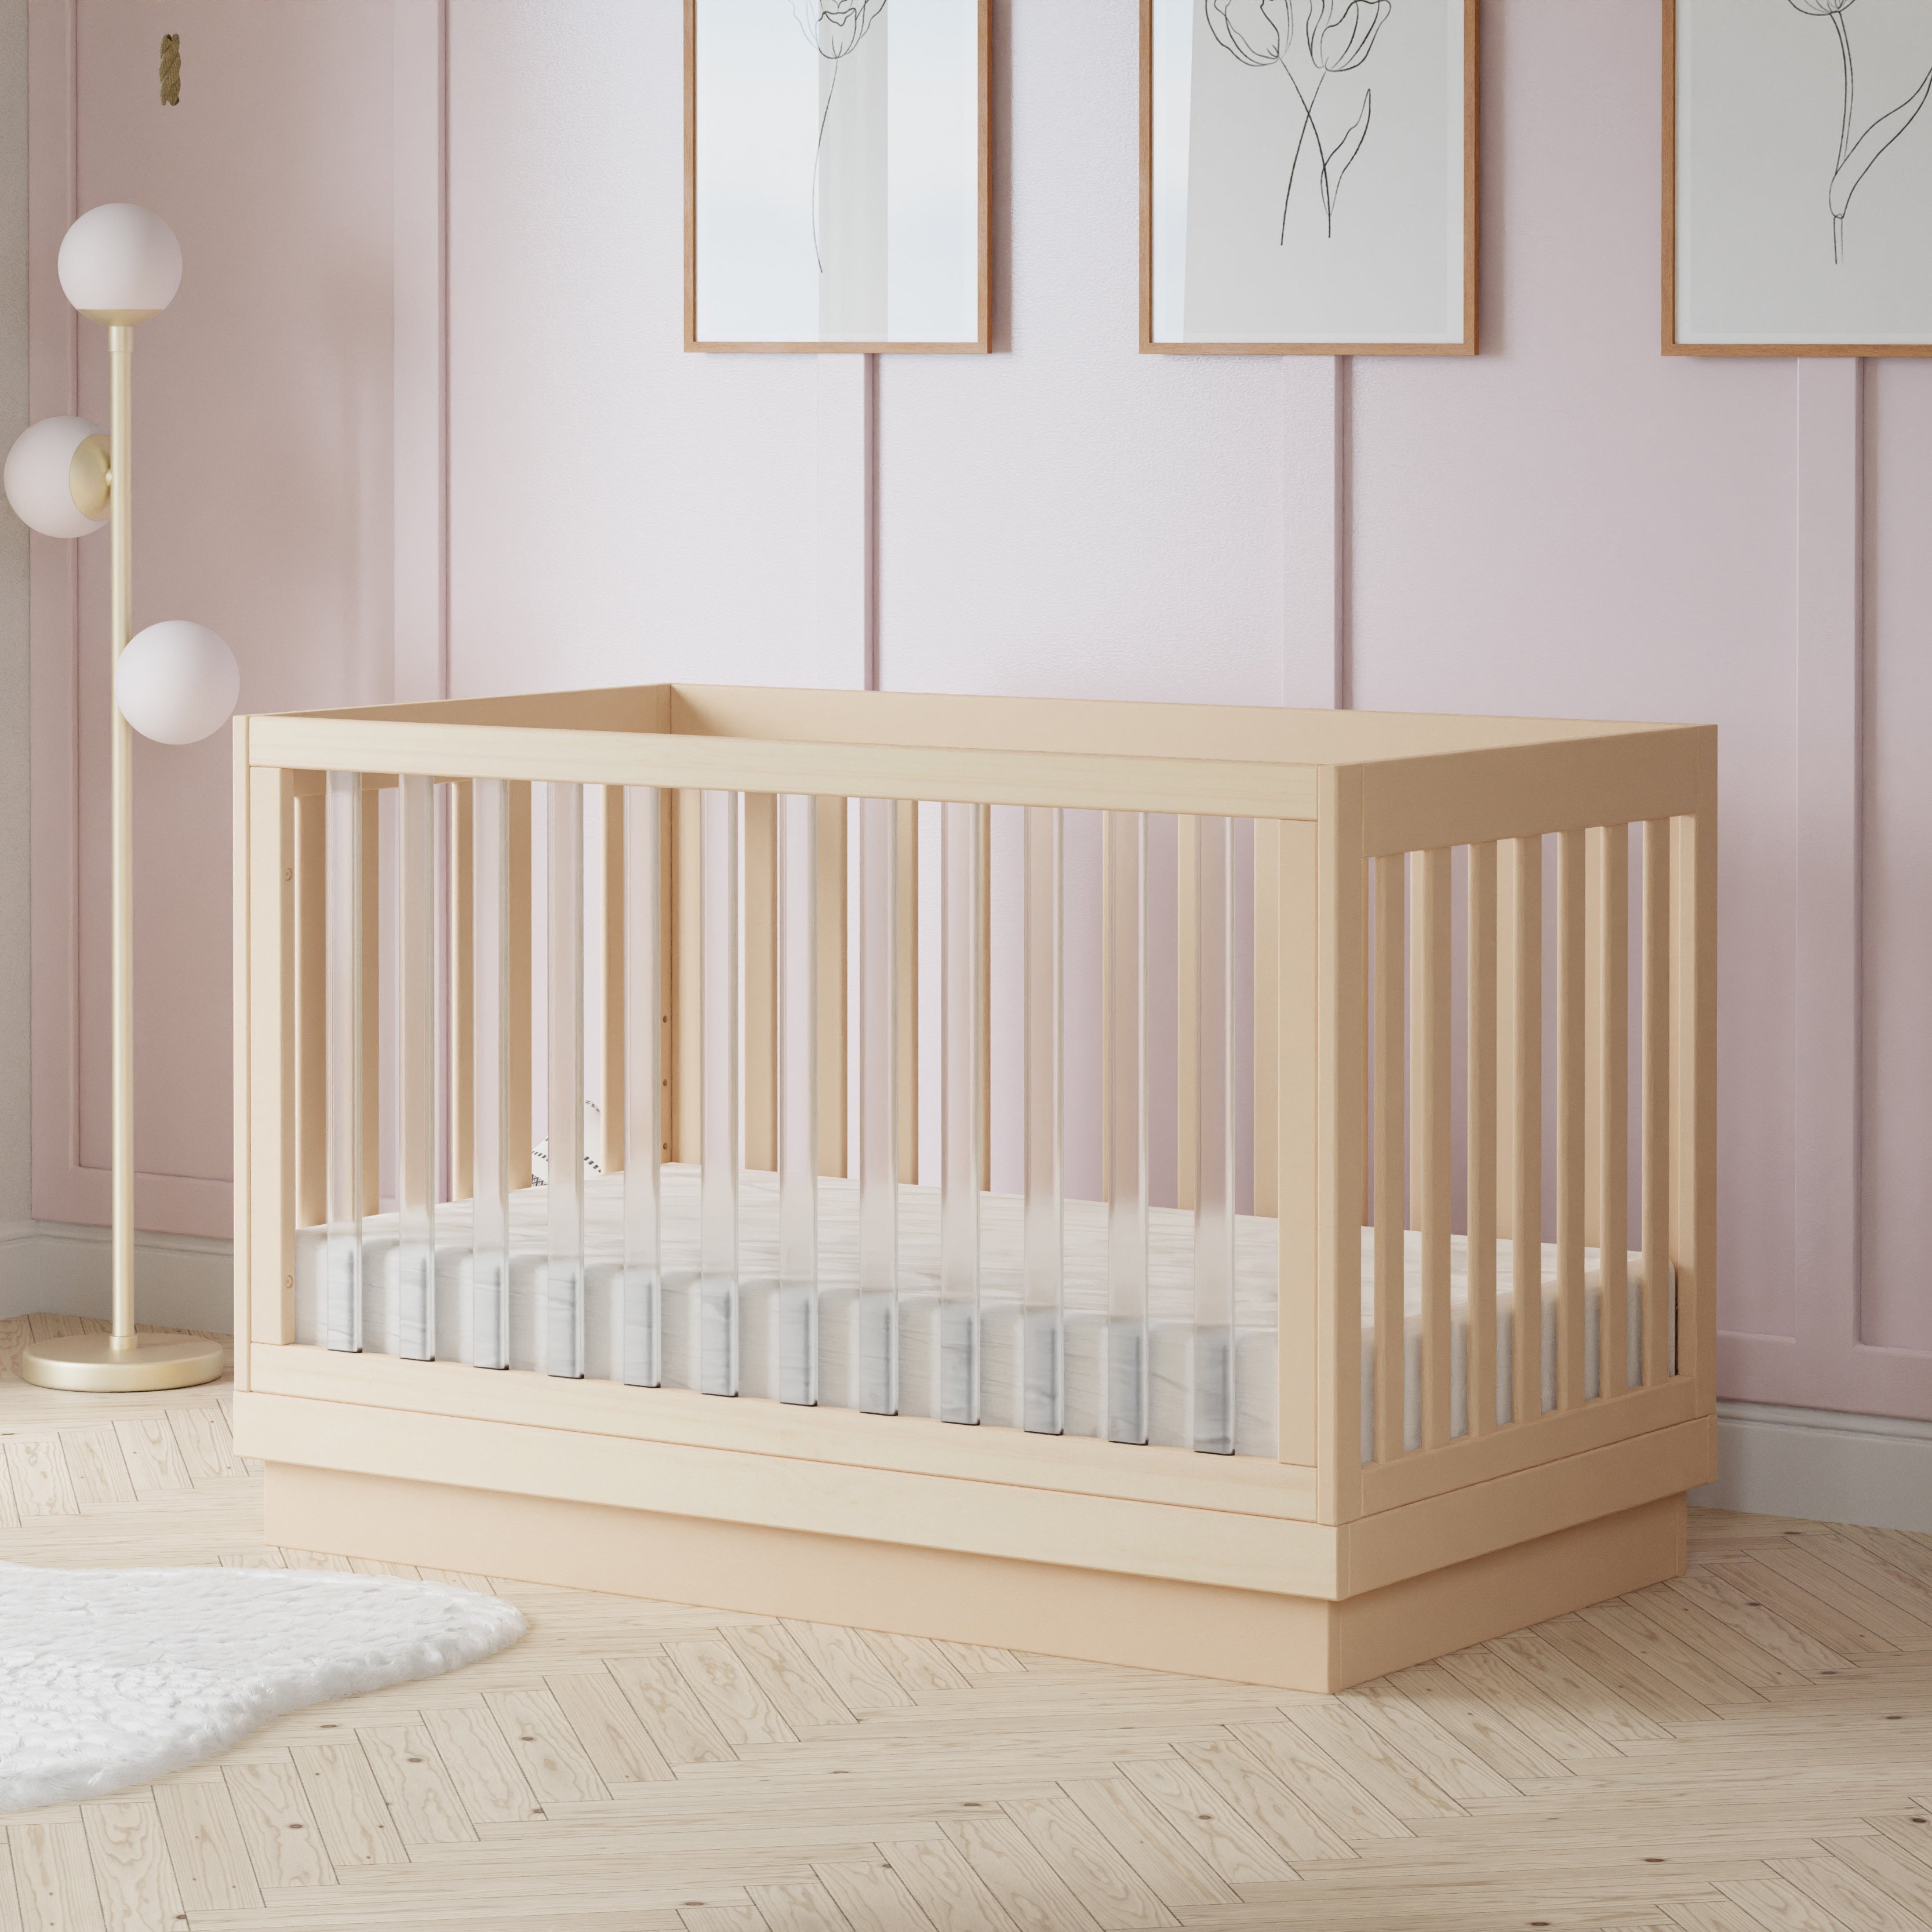 Harlow 3-in-1 Convertible Crib in Washed Natural - Twinkle Twinkle Little One